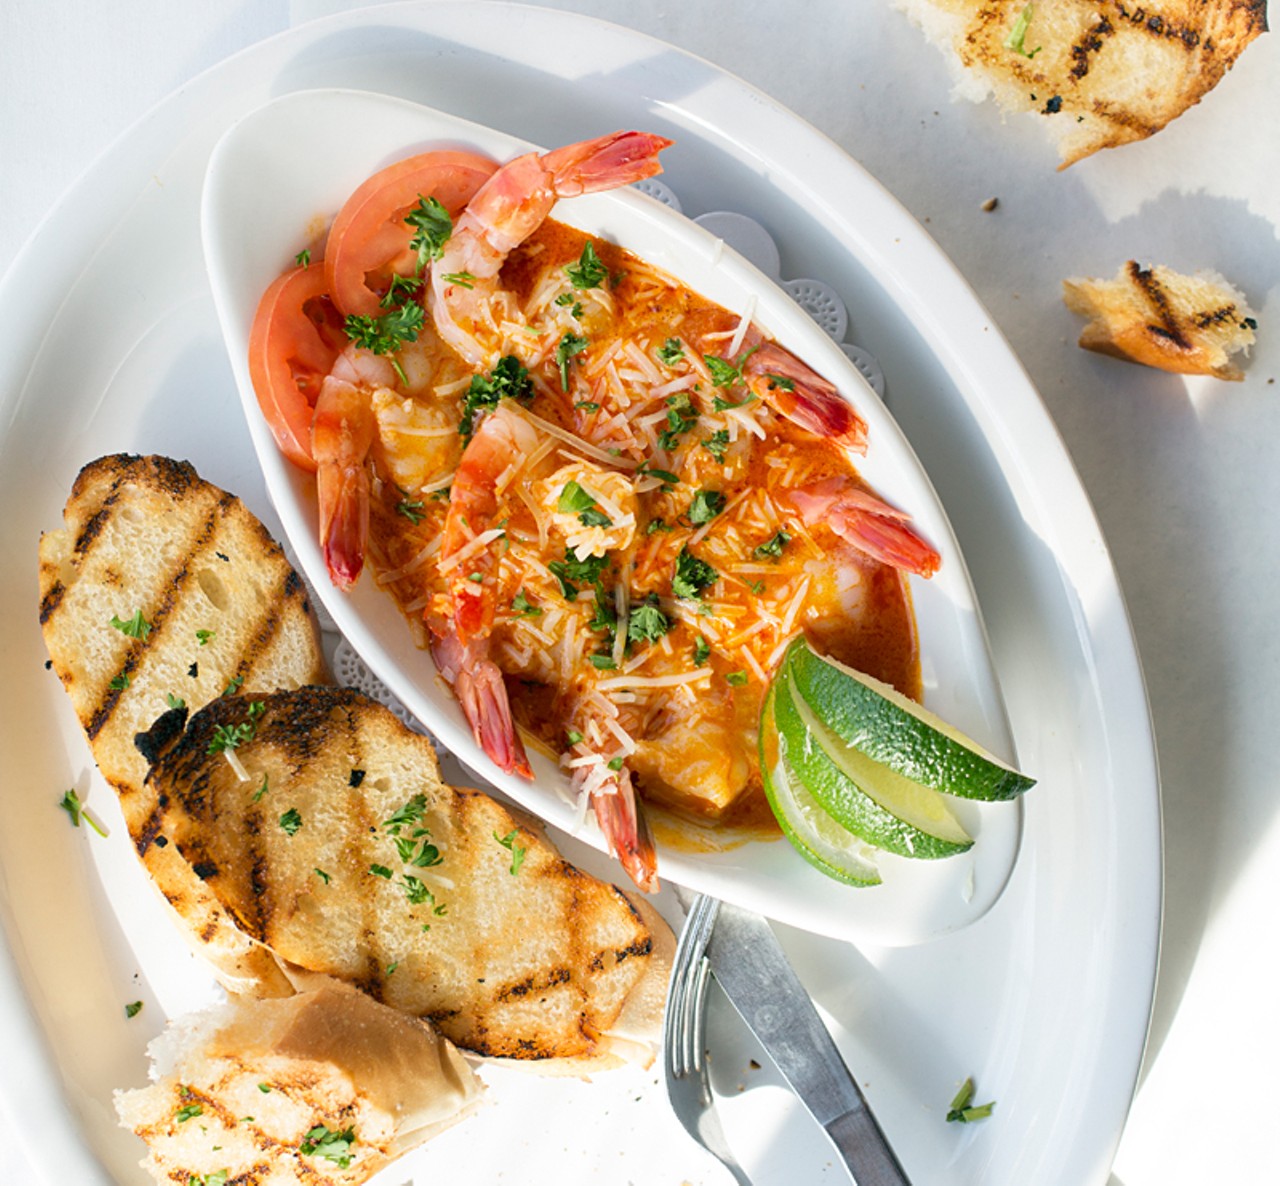 The "Tabasco Butter Shrimp" are Gulf shrimp smothered in rich Tabasco sauce with French bread and lime.